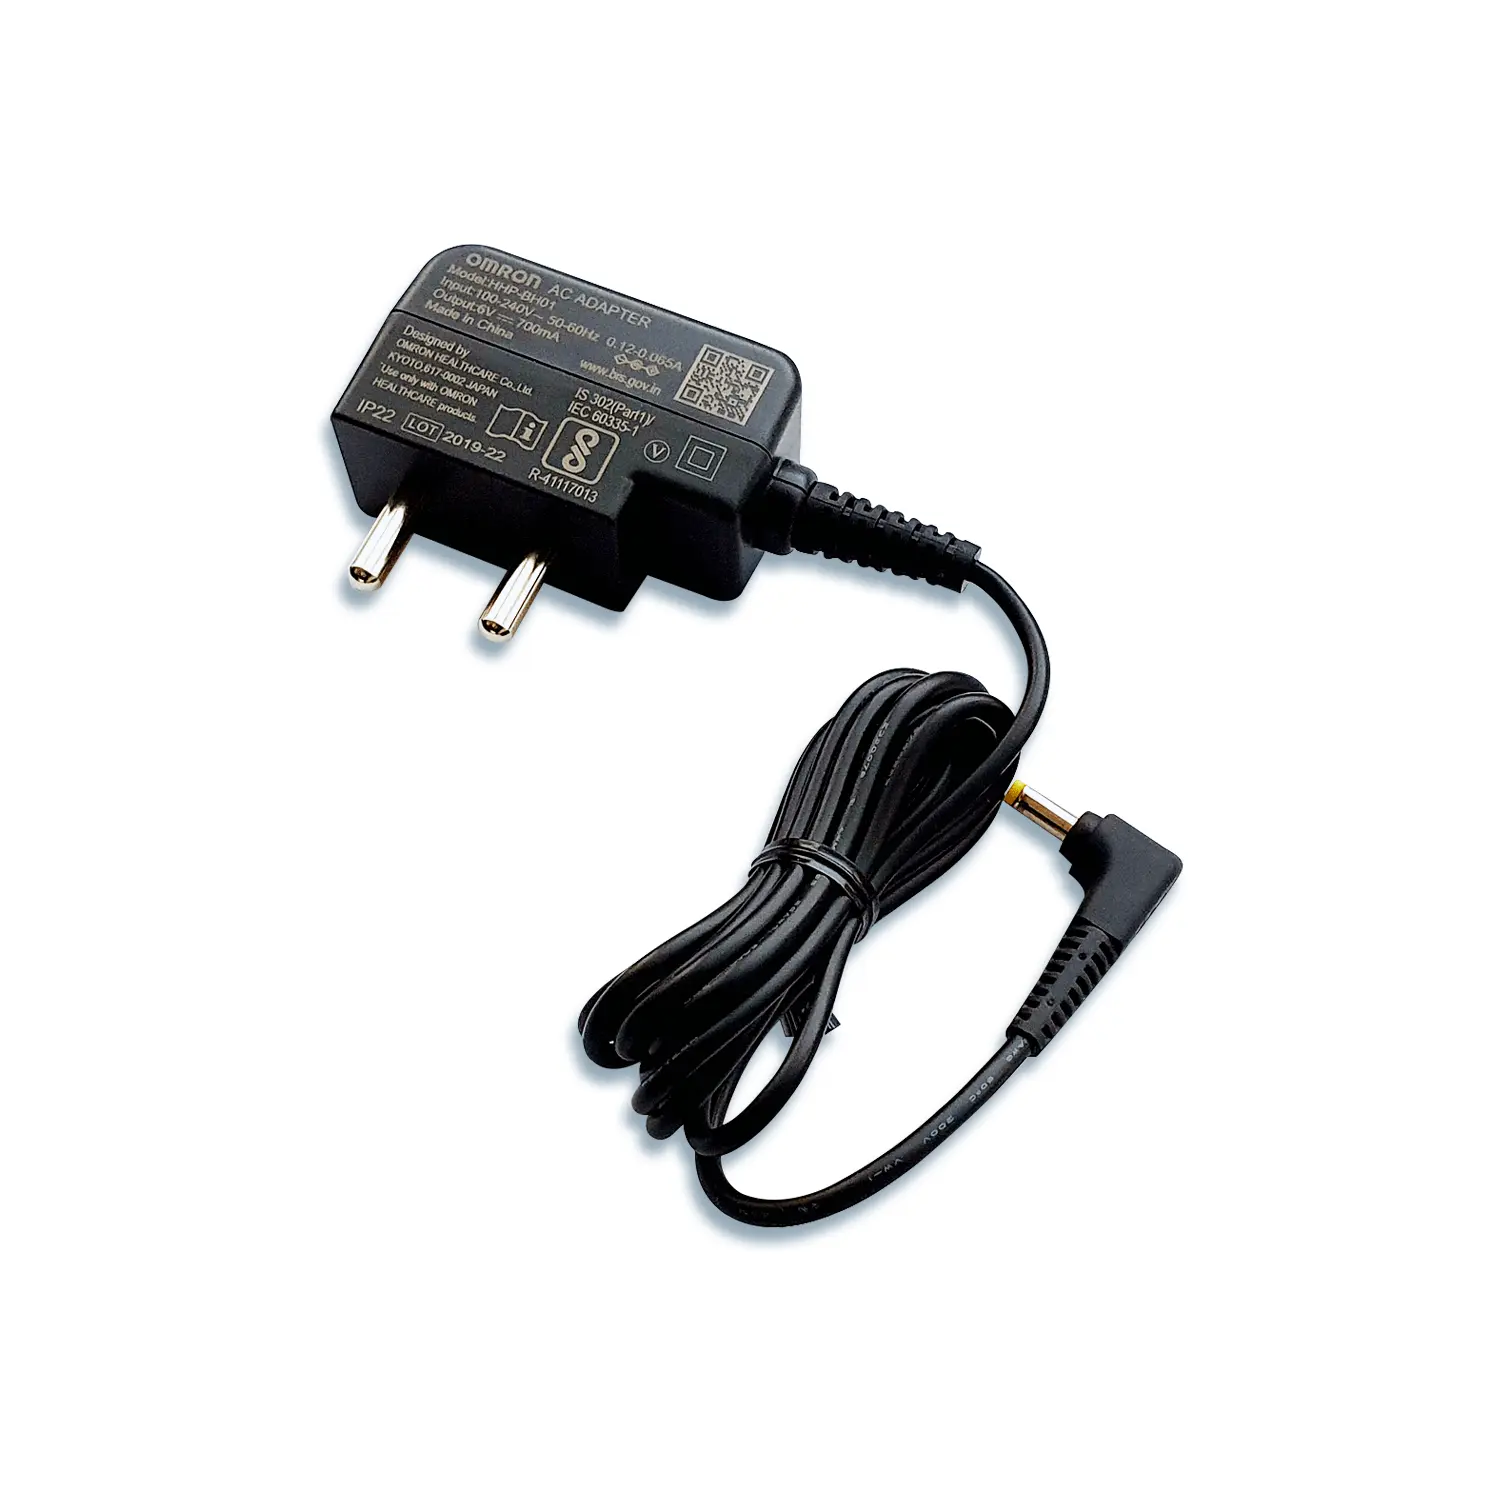 Omron AC Adapter for Omron Blood Pressure Monitors